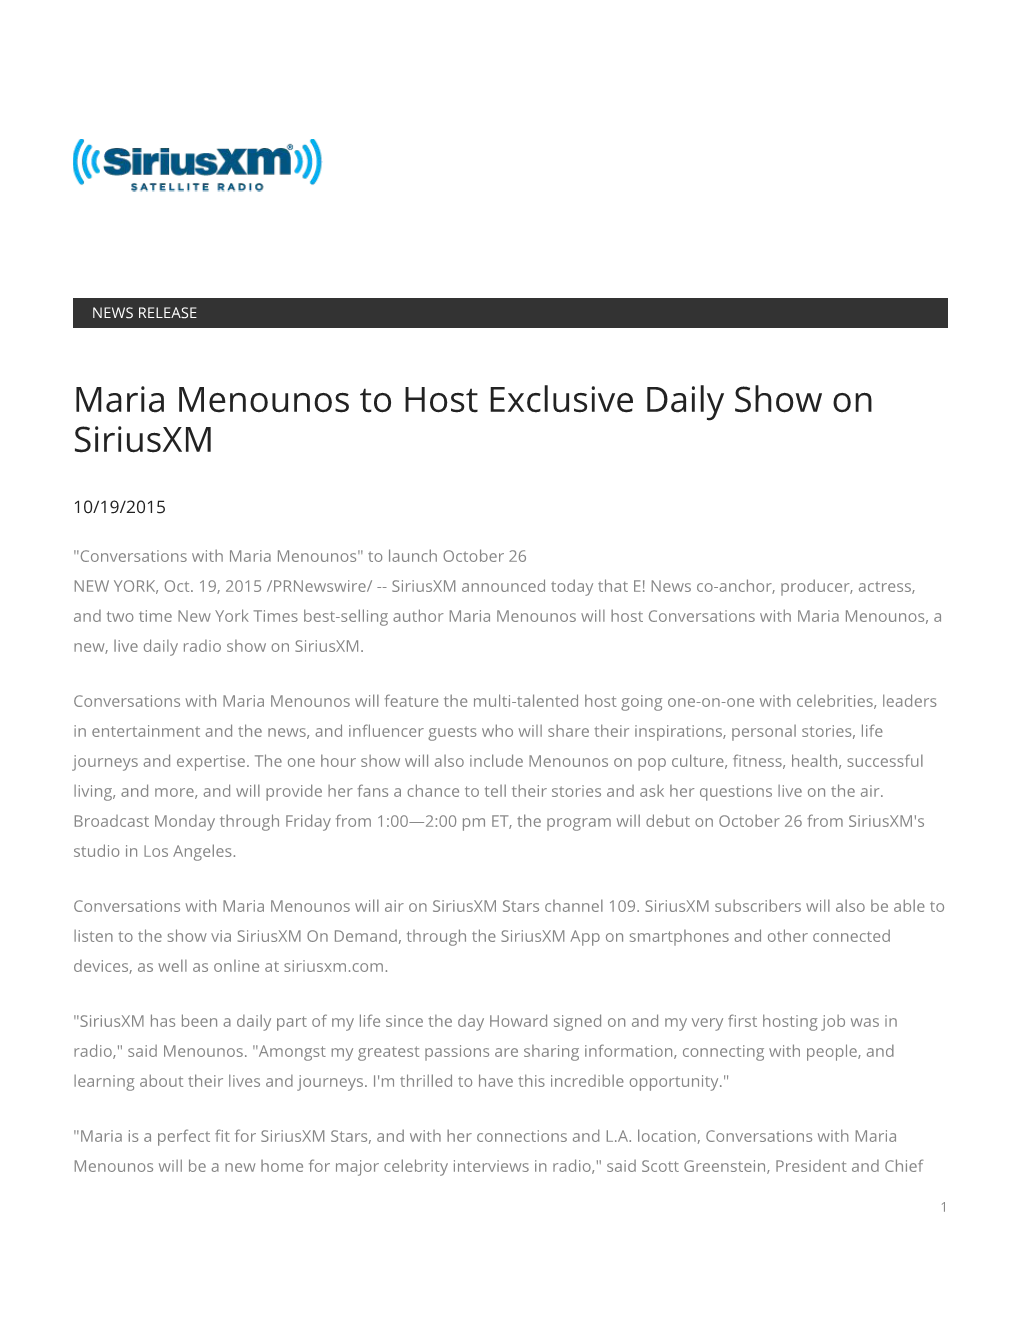 Maria Menounos to Host Exclusive Daily Show on Siriusxm